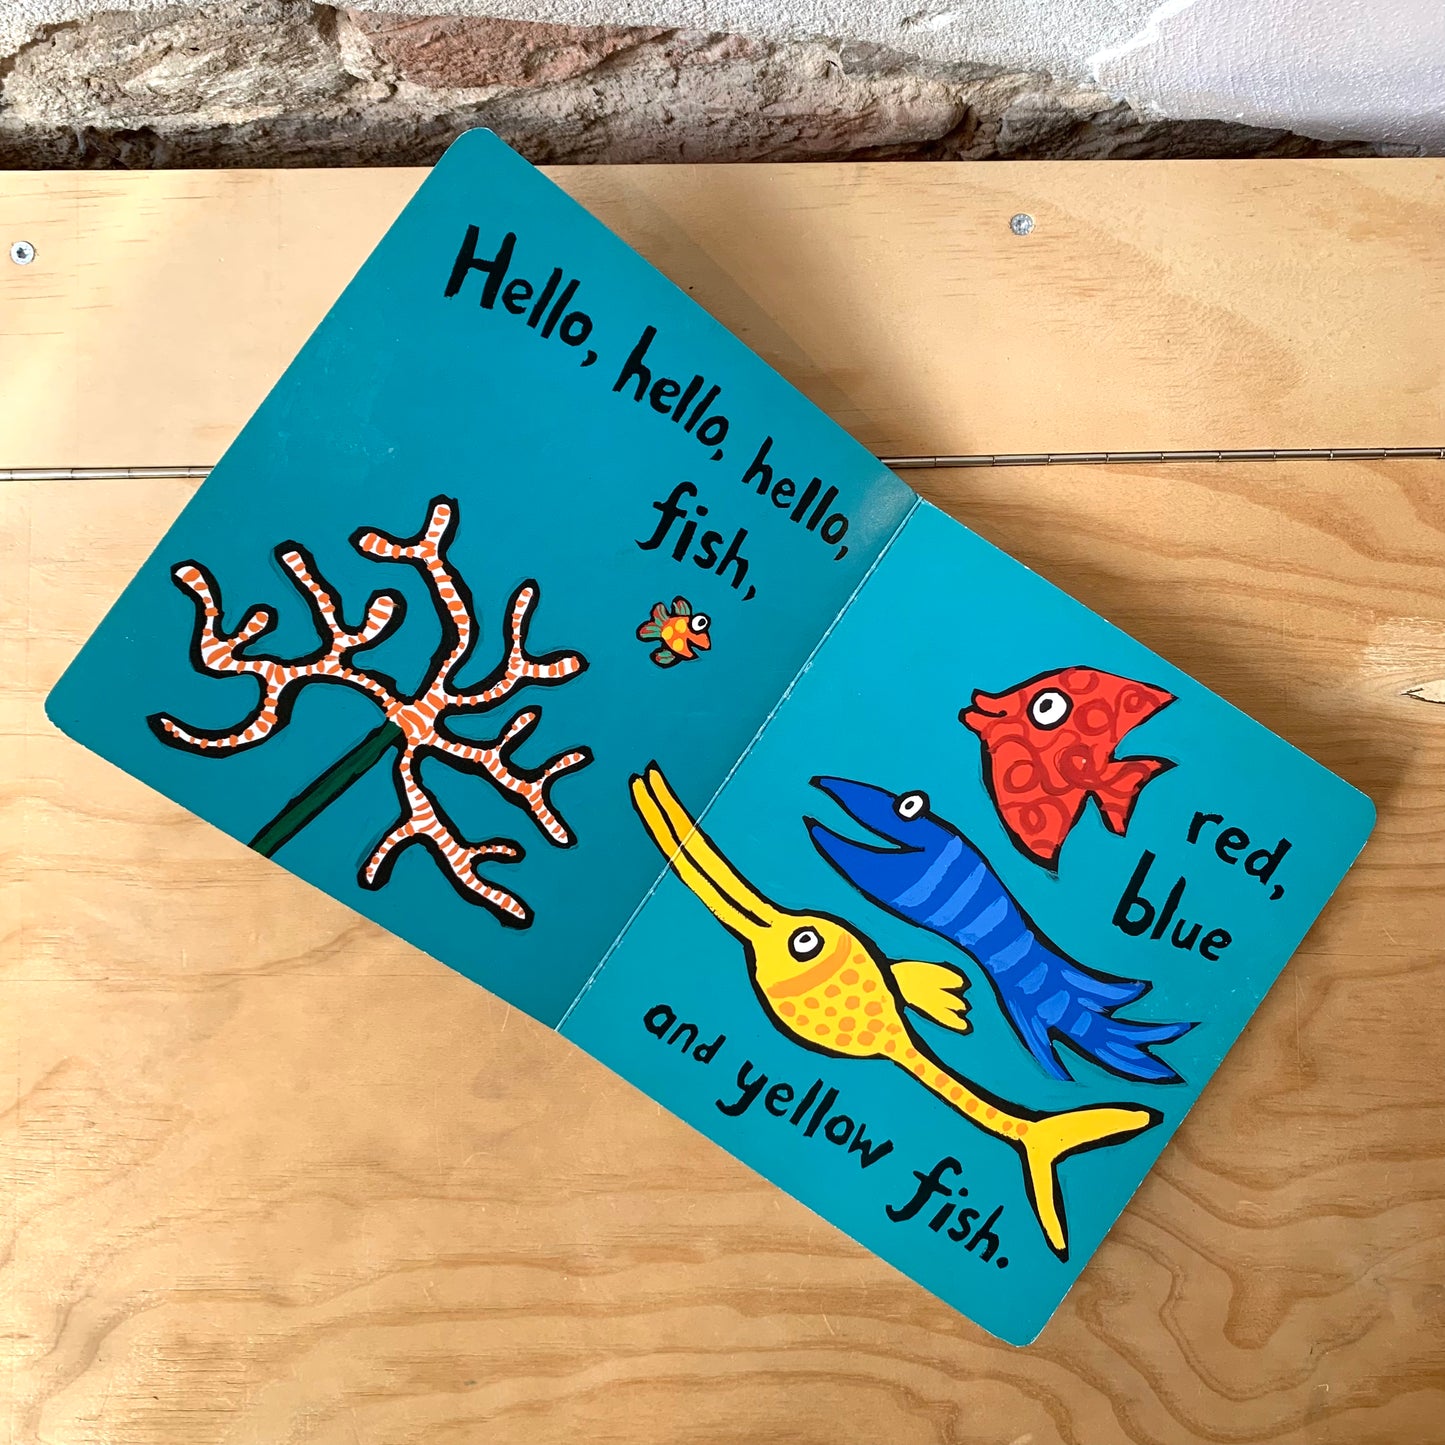 Hooray for Fish! – Lucy Cousins